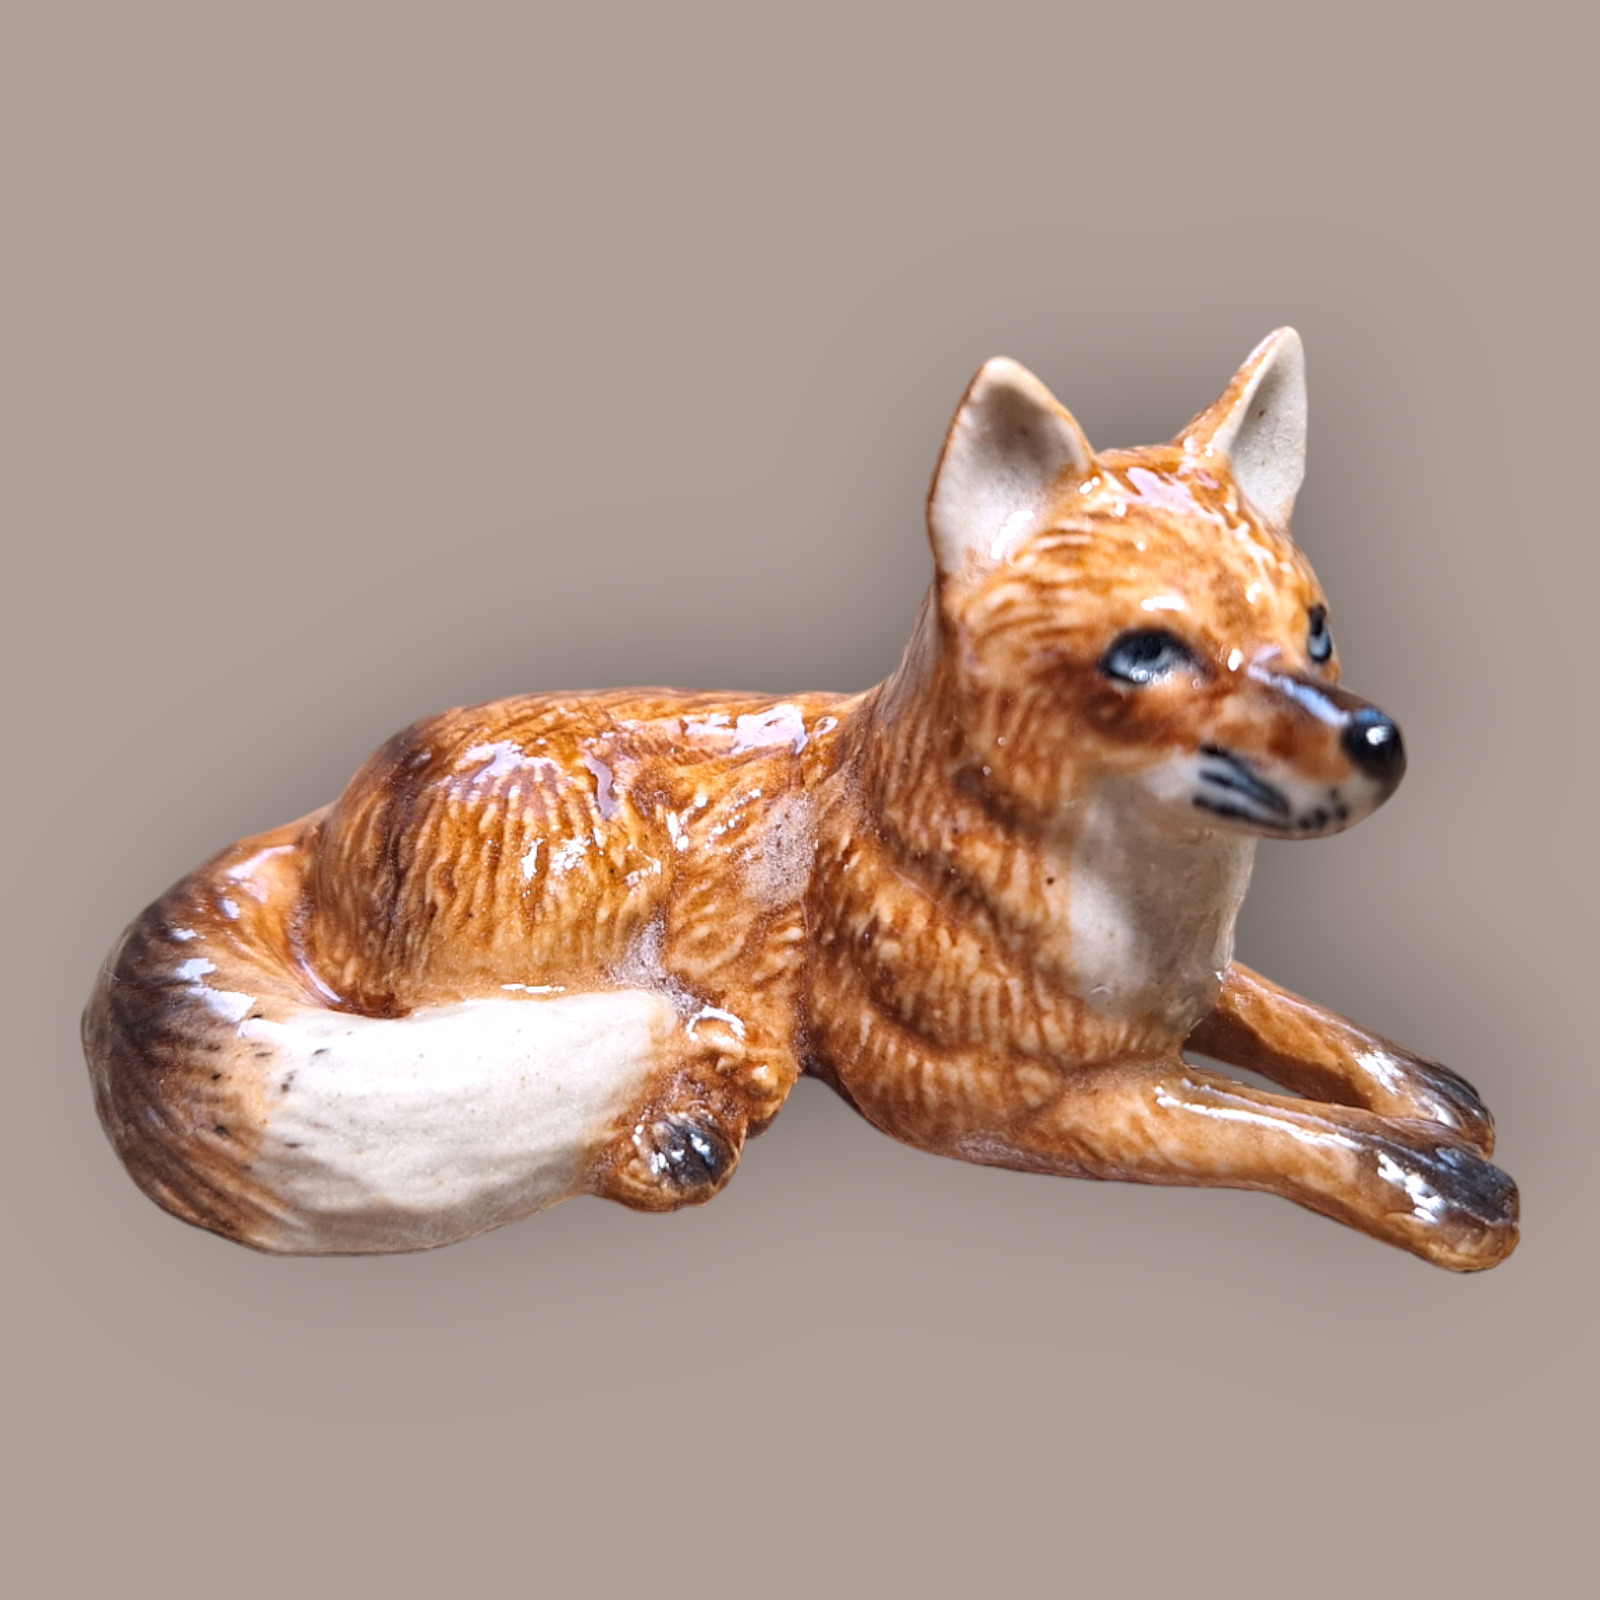 NORTHERN ROSE Red Fox Lying Down Porcelain Miniature Figurine New  R031